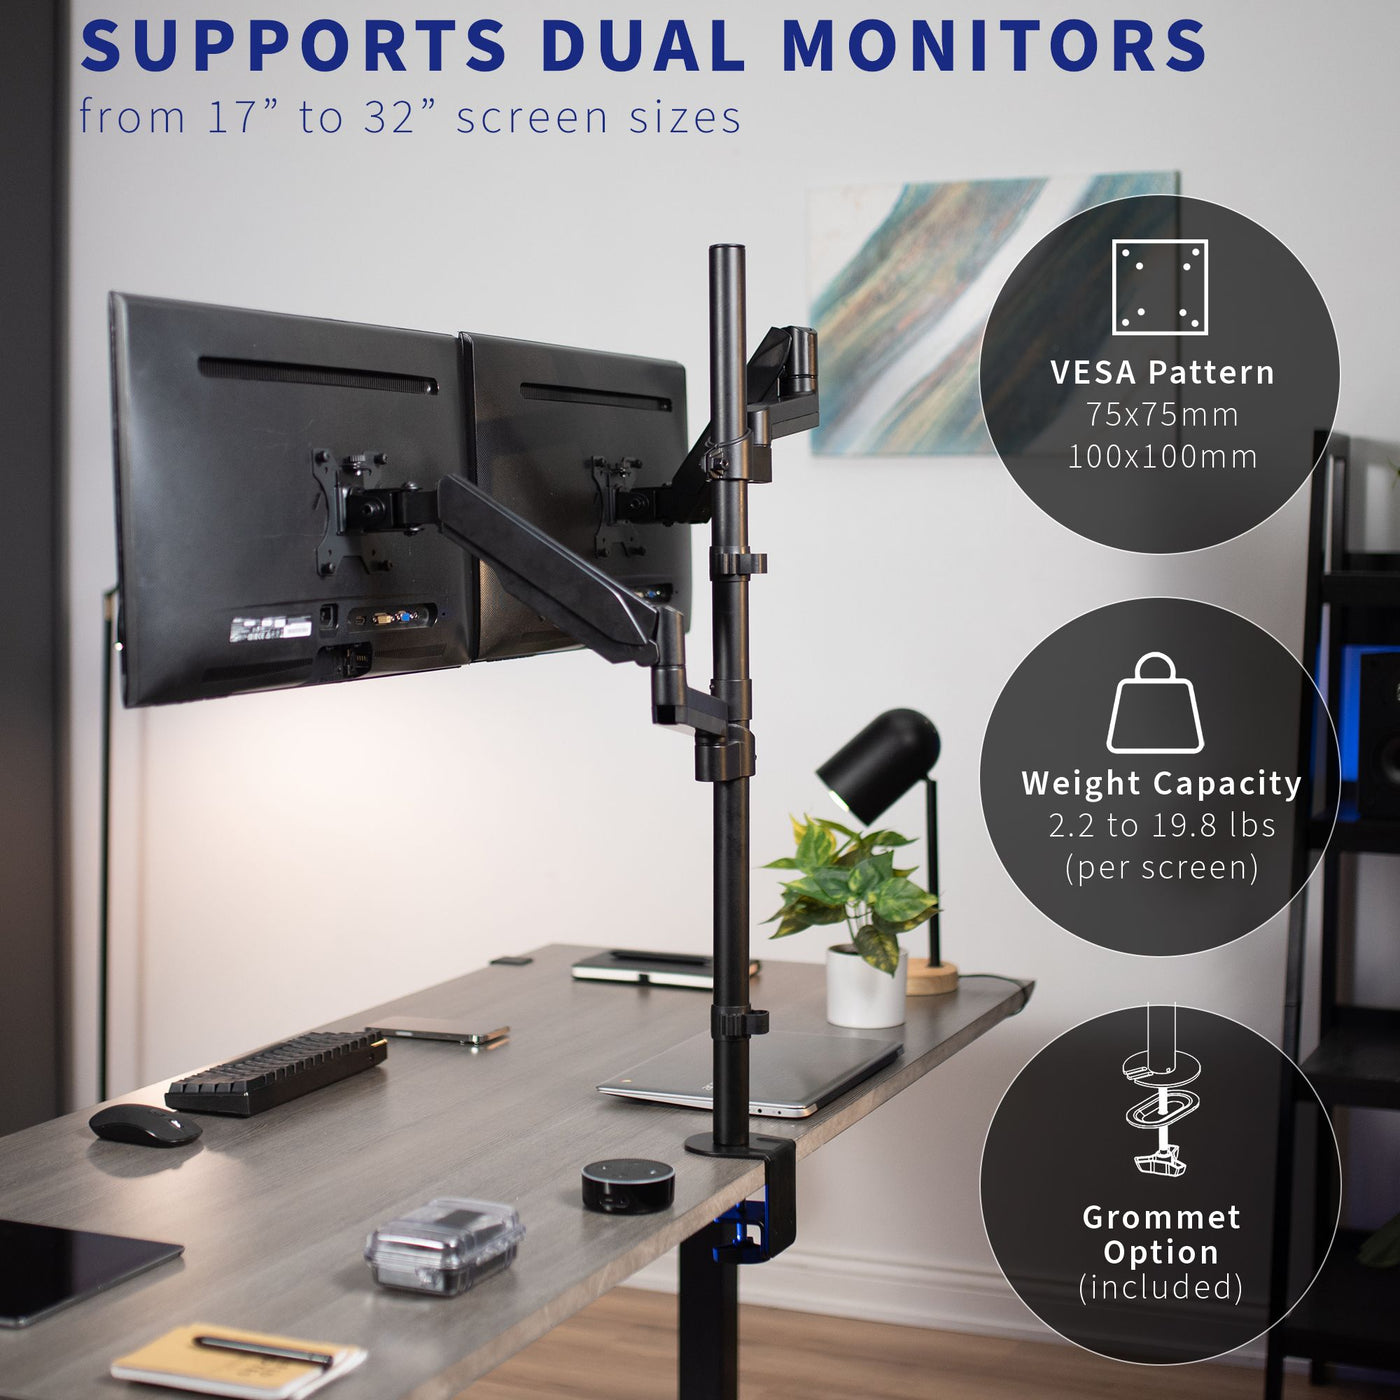 Extra-Tall Dual Spring Arm Adjustable Monitor Desk Mount – Mount-It!